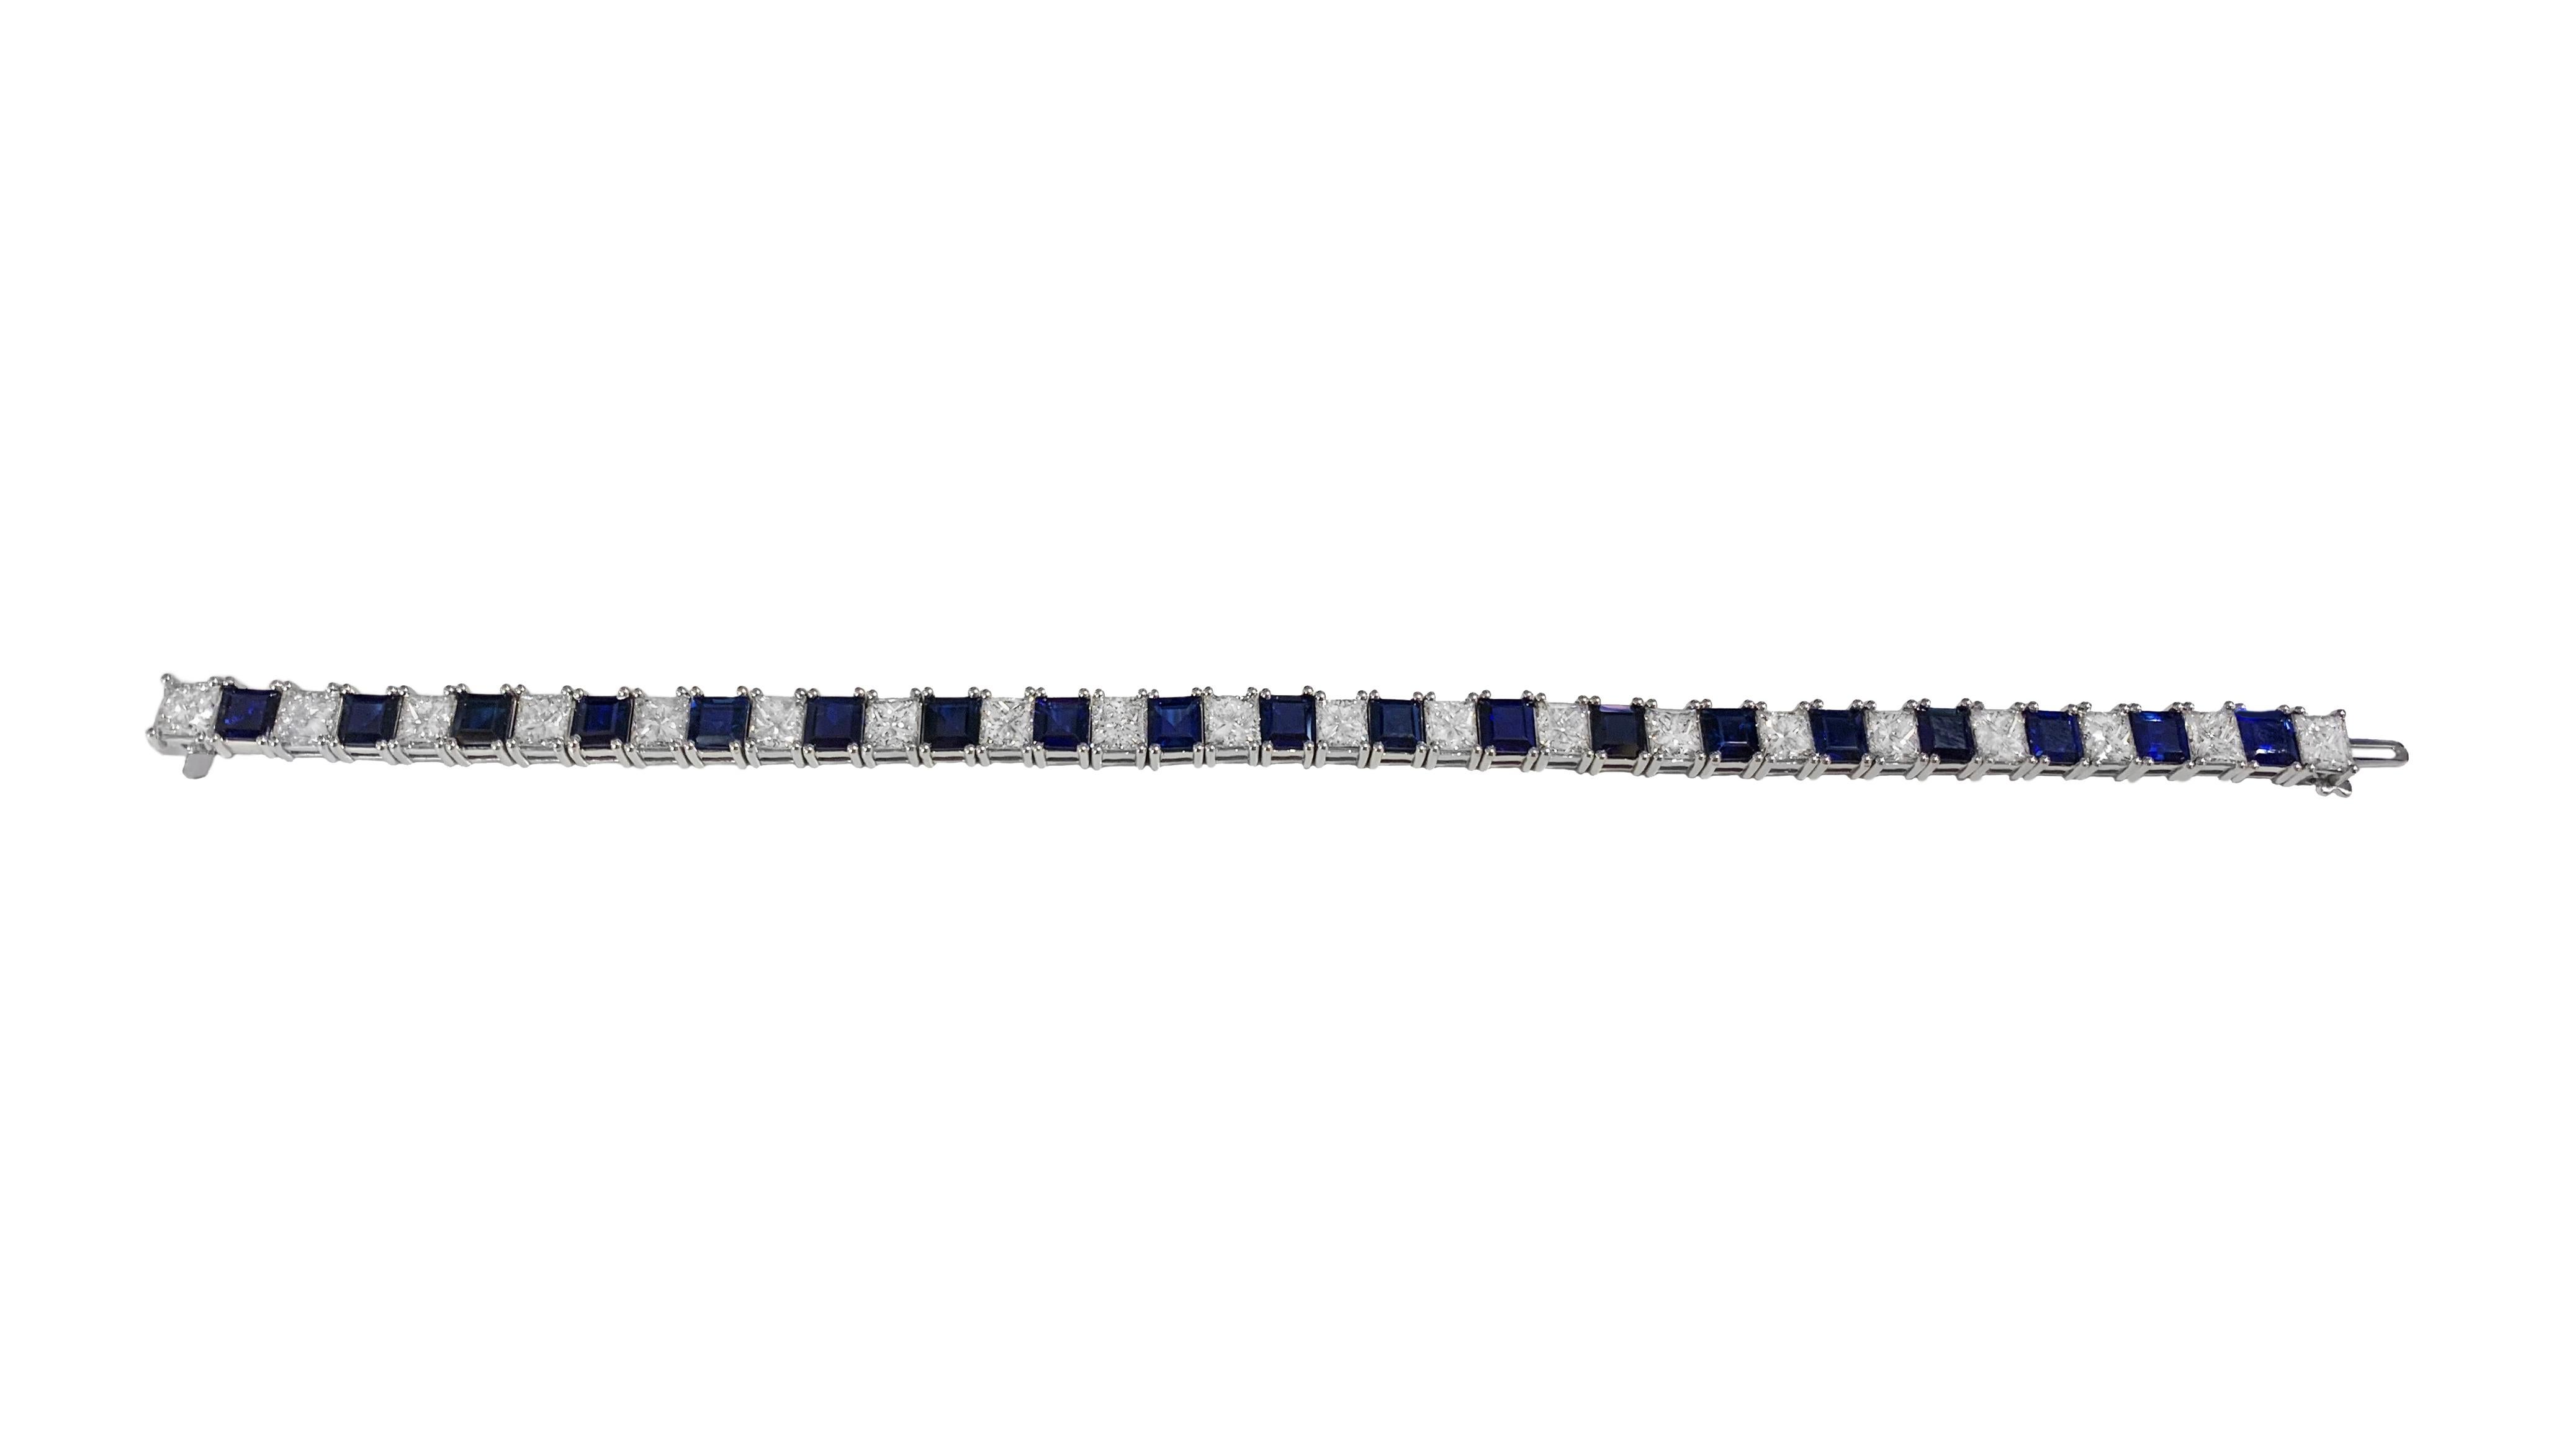 -14 White gold
-Length: 7”
-Weight: 23gr
-Width: 5.8mm
-Cilium sapphires: 10.35ct
-DIAMONDS: 10.05ct, G-H color, VS clarity